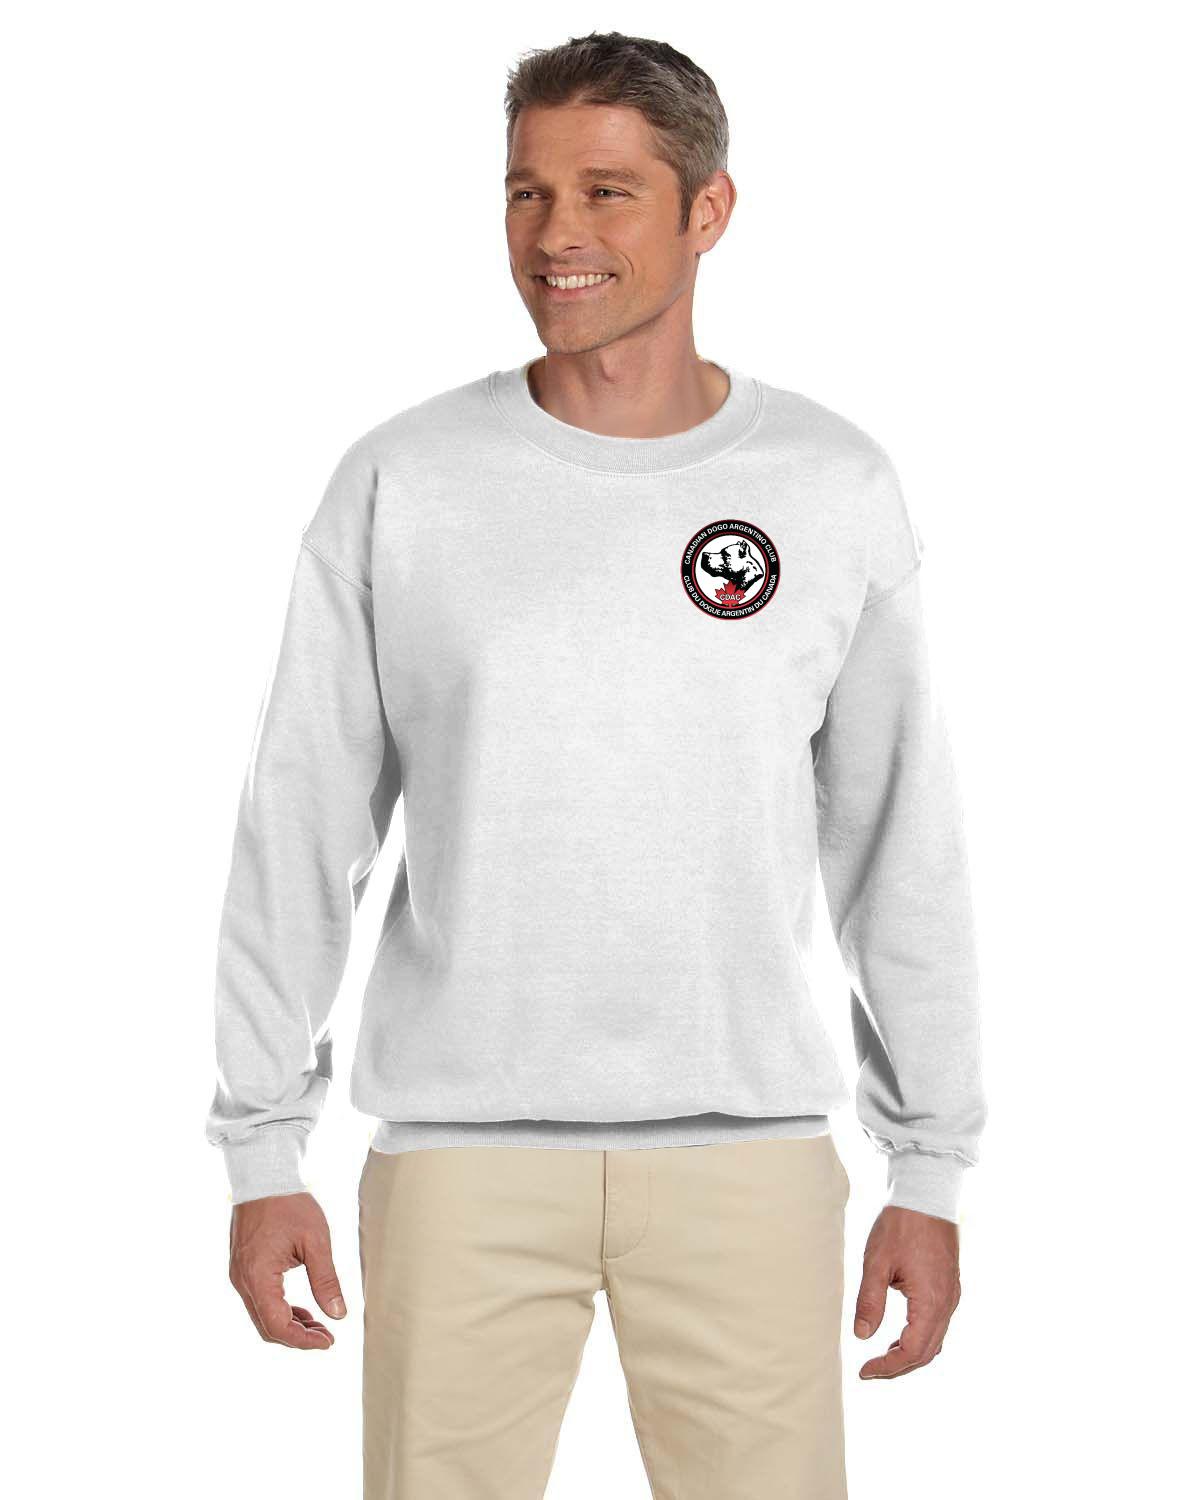 CDAC "Passion" Light Coloured Adult Crew Neck Sweater